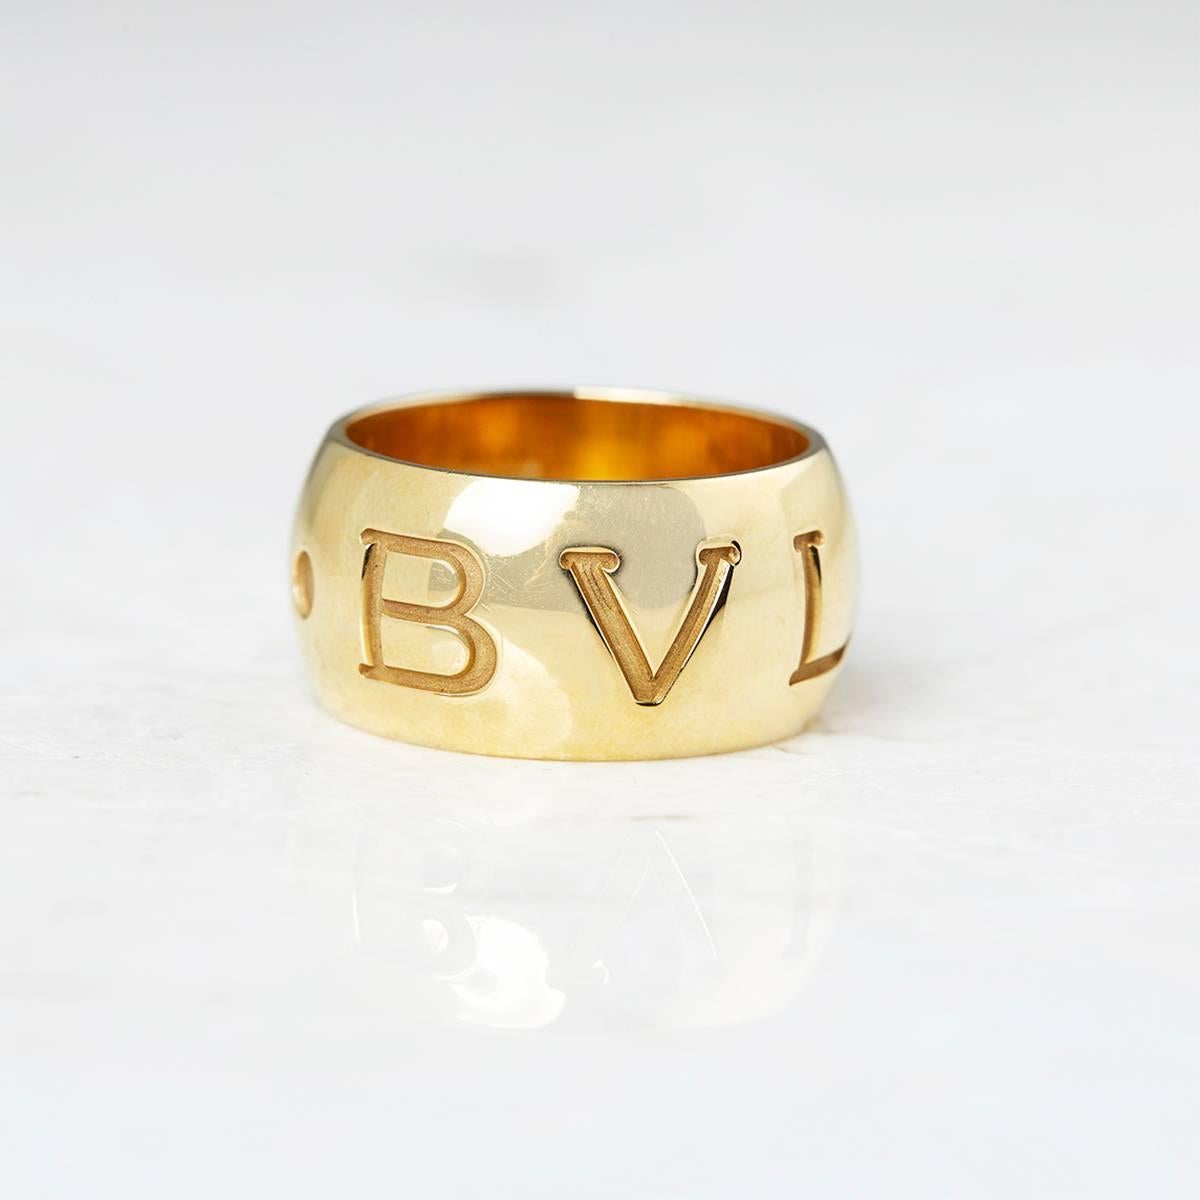 Xupes Code: J121
Brand: Bulgari
Description: 18k Yellow Gold Monologo Ring
Accompanied With: Box Only
Gender: Ladies
UK Ring Size: L
EU Ring Size: 52
US Ring Size: 6
Resizing Possible?: NO
Band Width: 1cm
Condition: 9
Material: Yellow Gold
Total